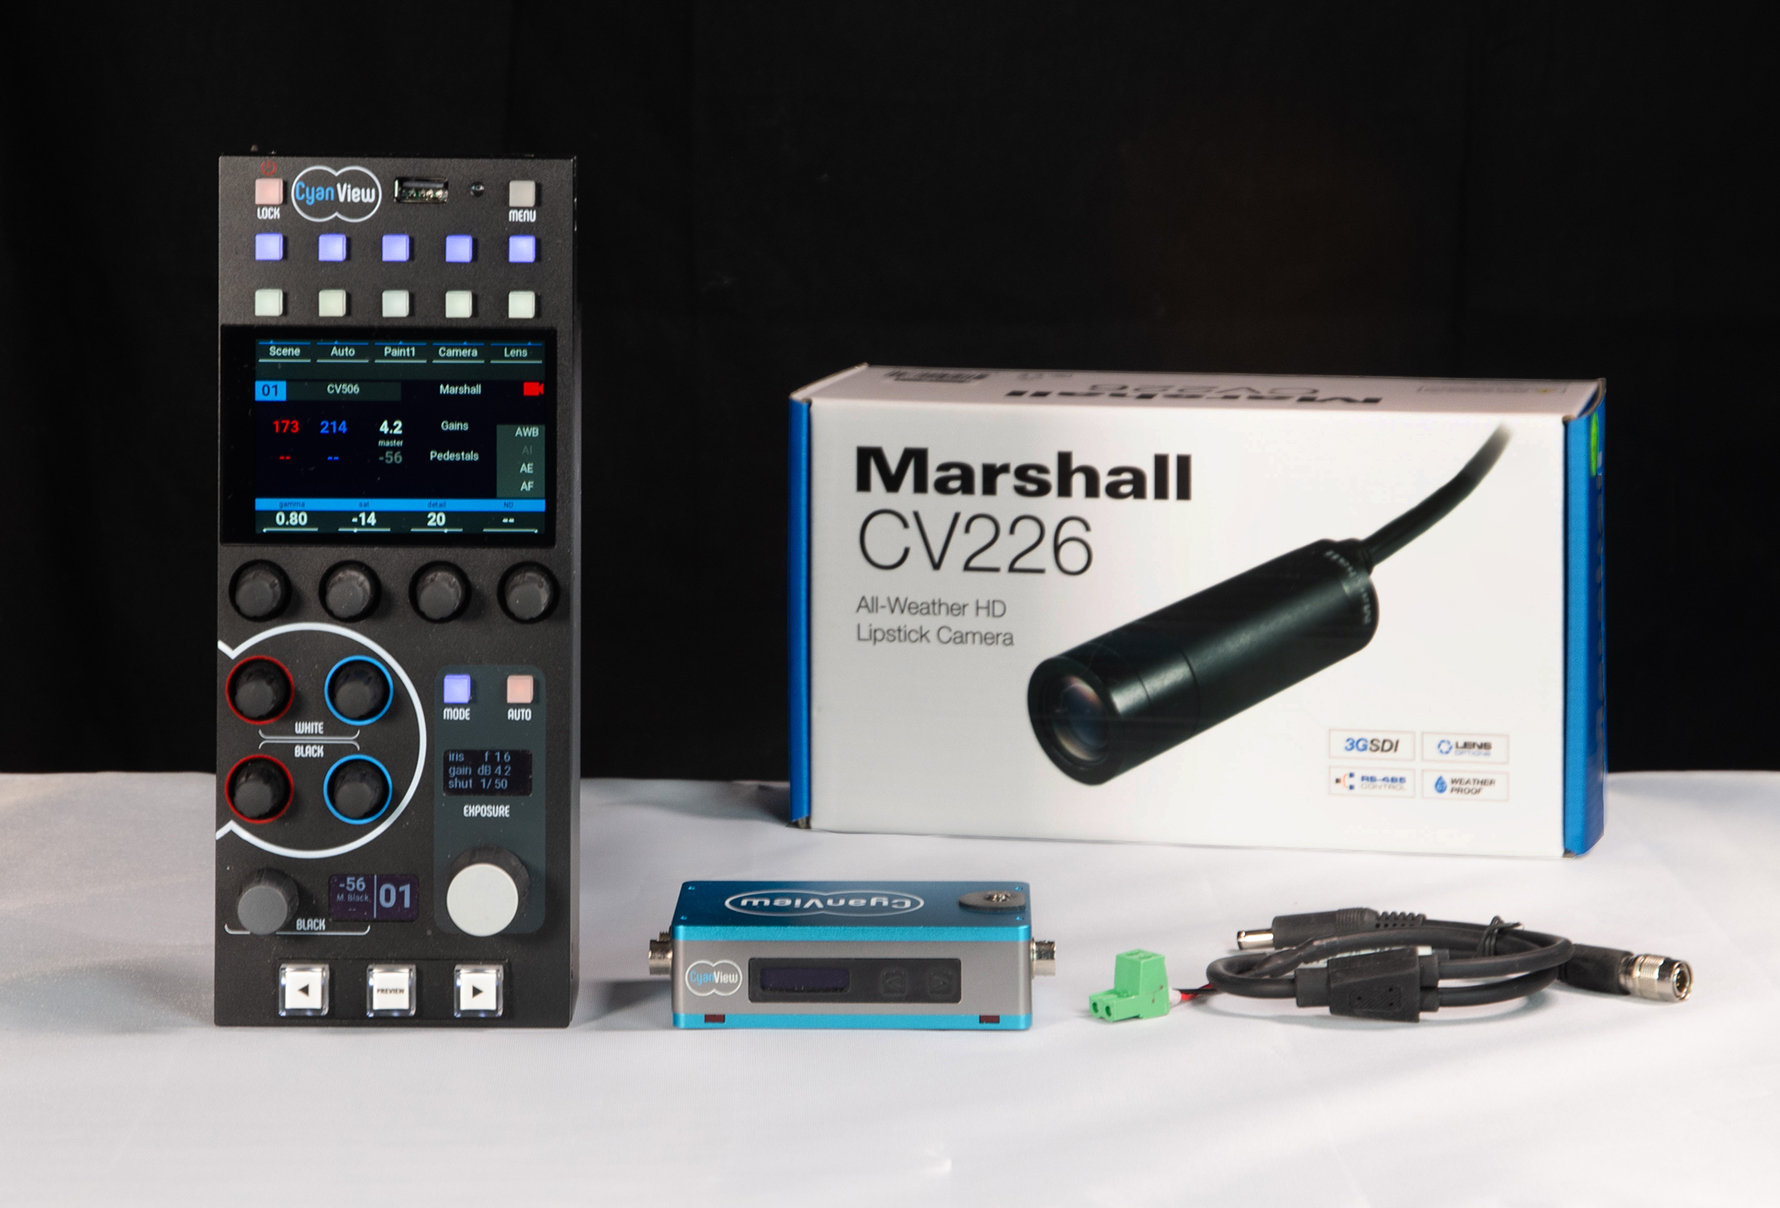 Marshall CV226 and CyanView